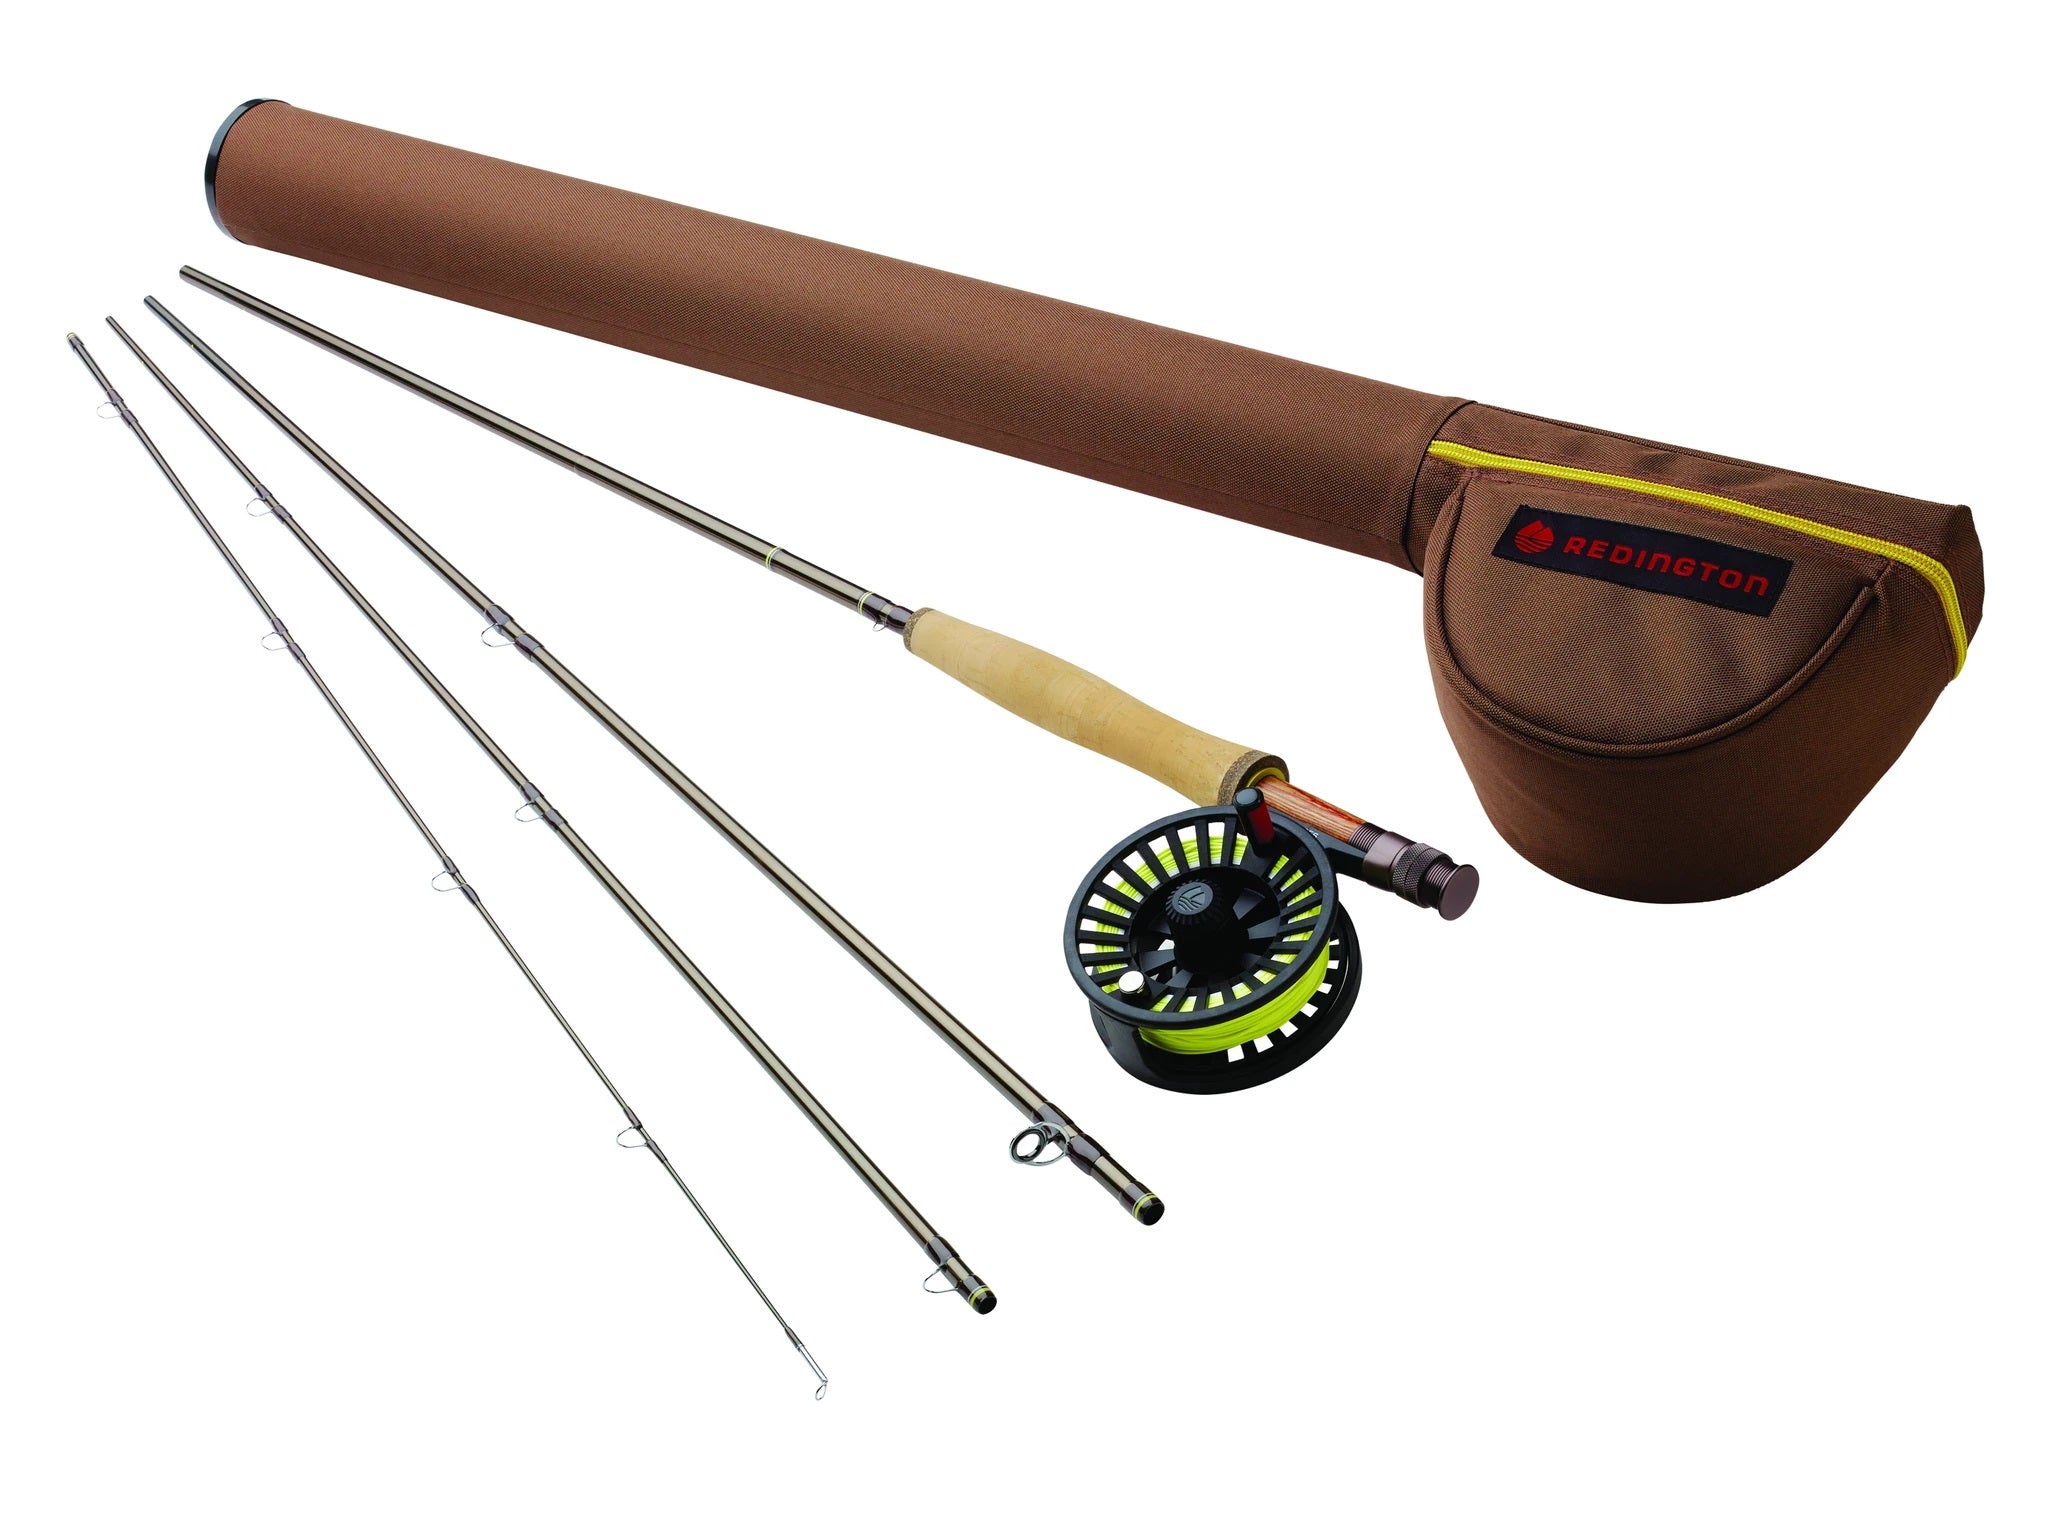 Sage Foundation Outfit Fly Fishing Combo 5wt 9' Lifetime Warranty